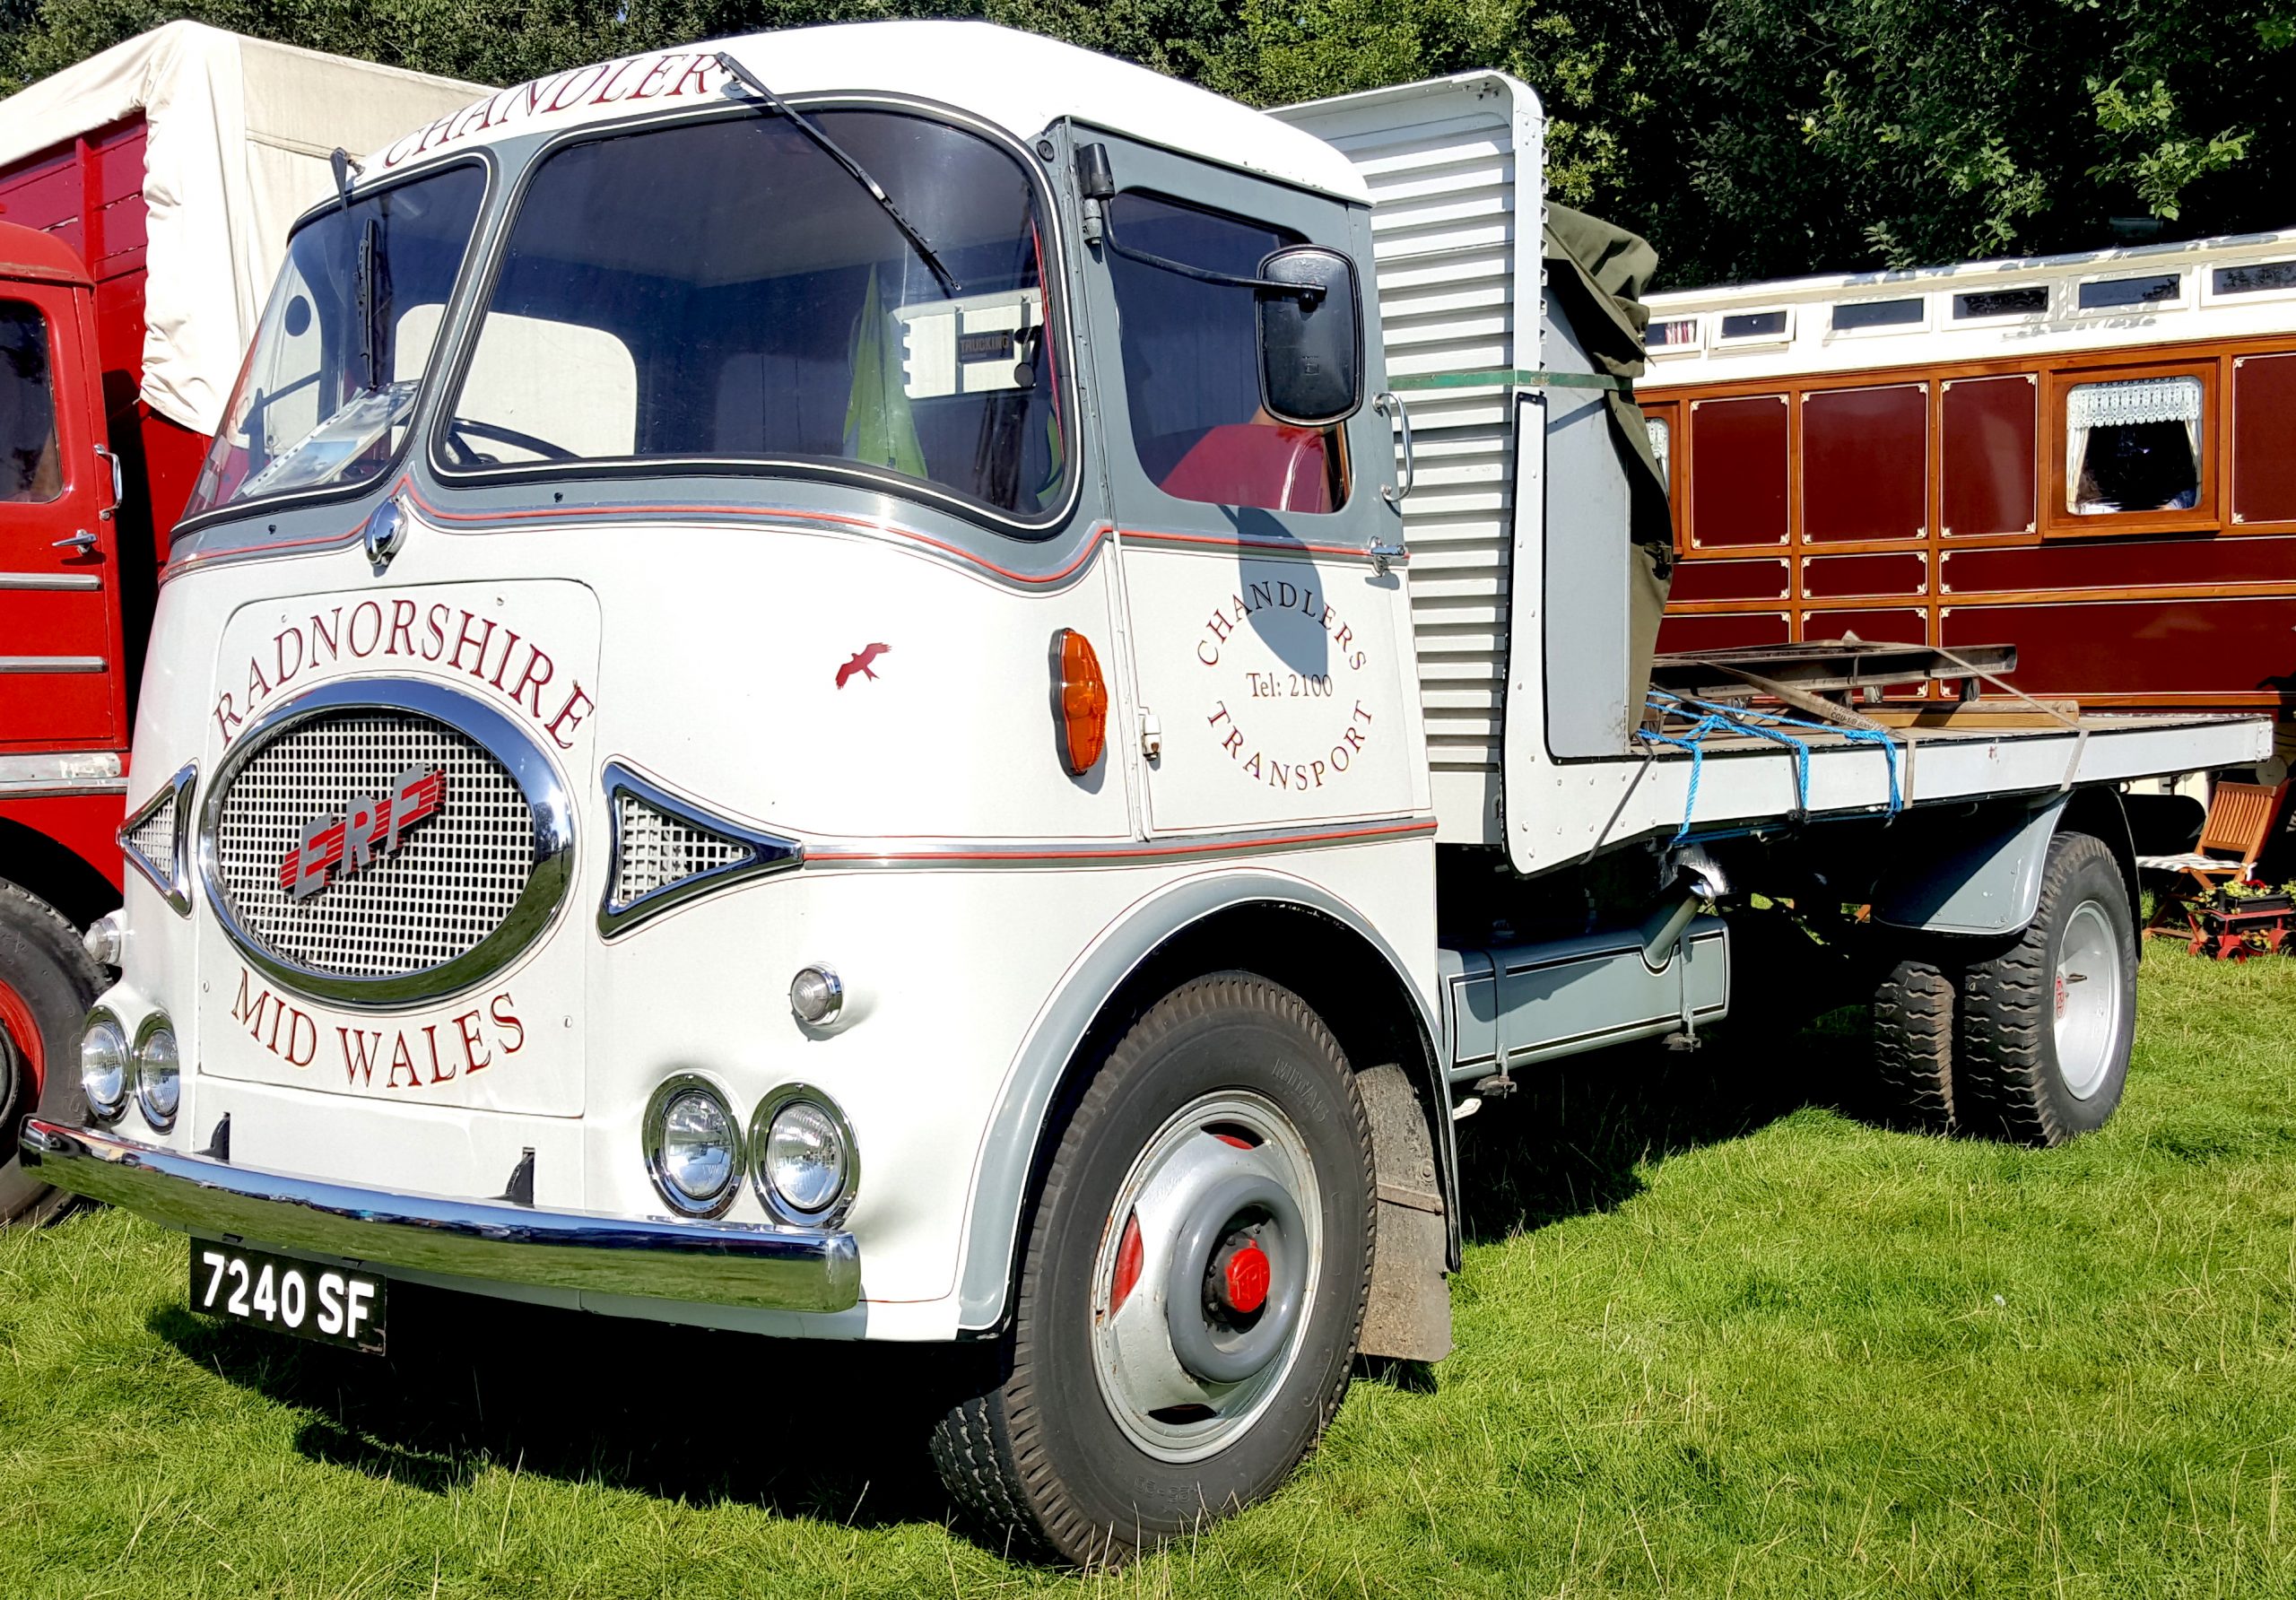 Chandlers-Transport-Vintage-ERF-classic-flatbed-lorry-scaled